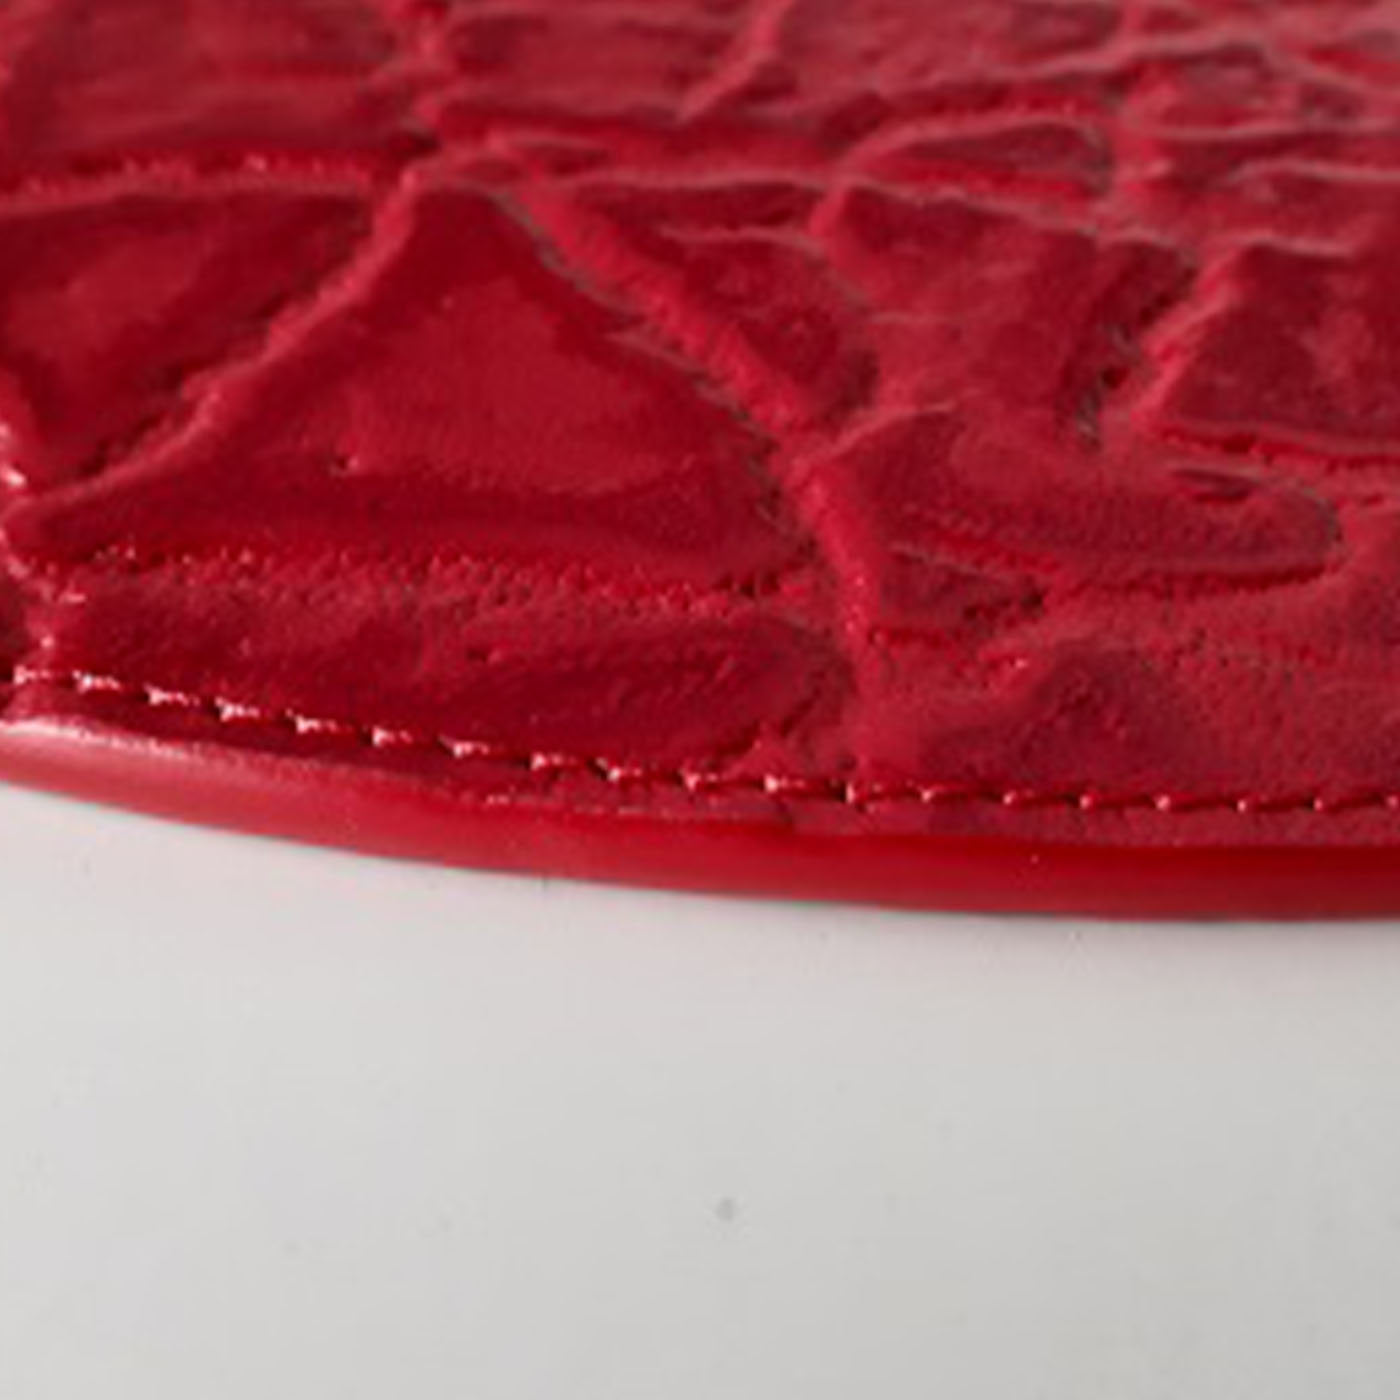 Tanzania Small Set of 2 Round Red Leather Placemats - Alternative view 3